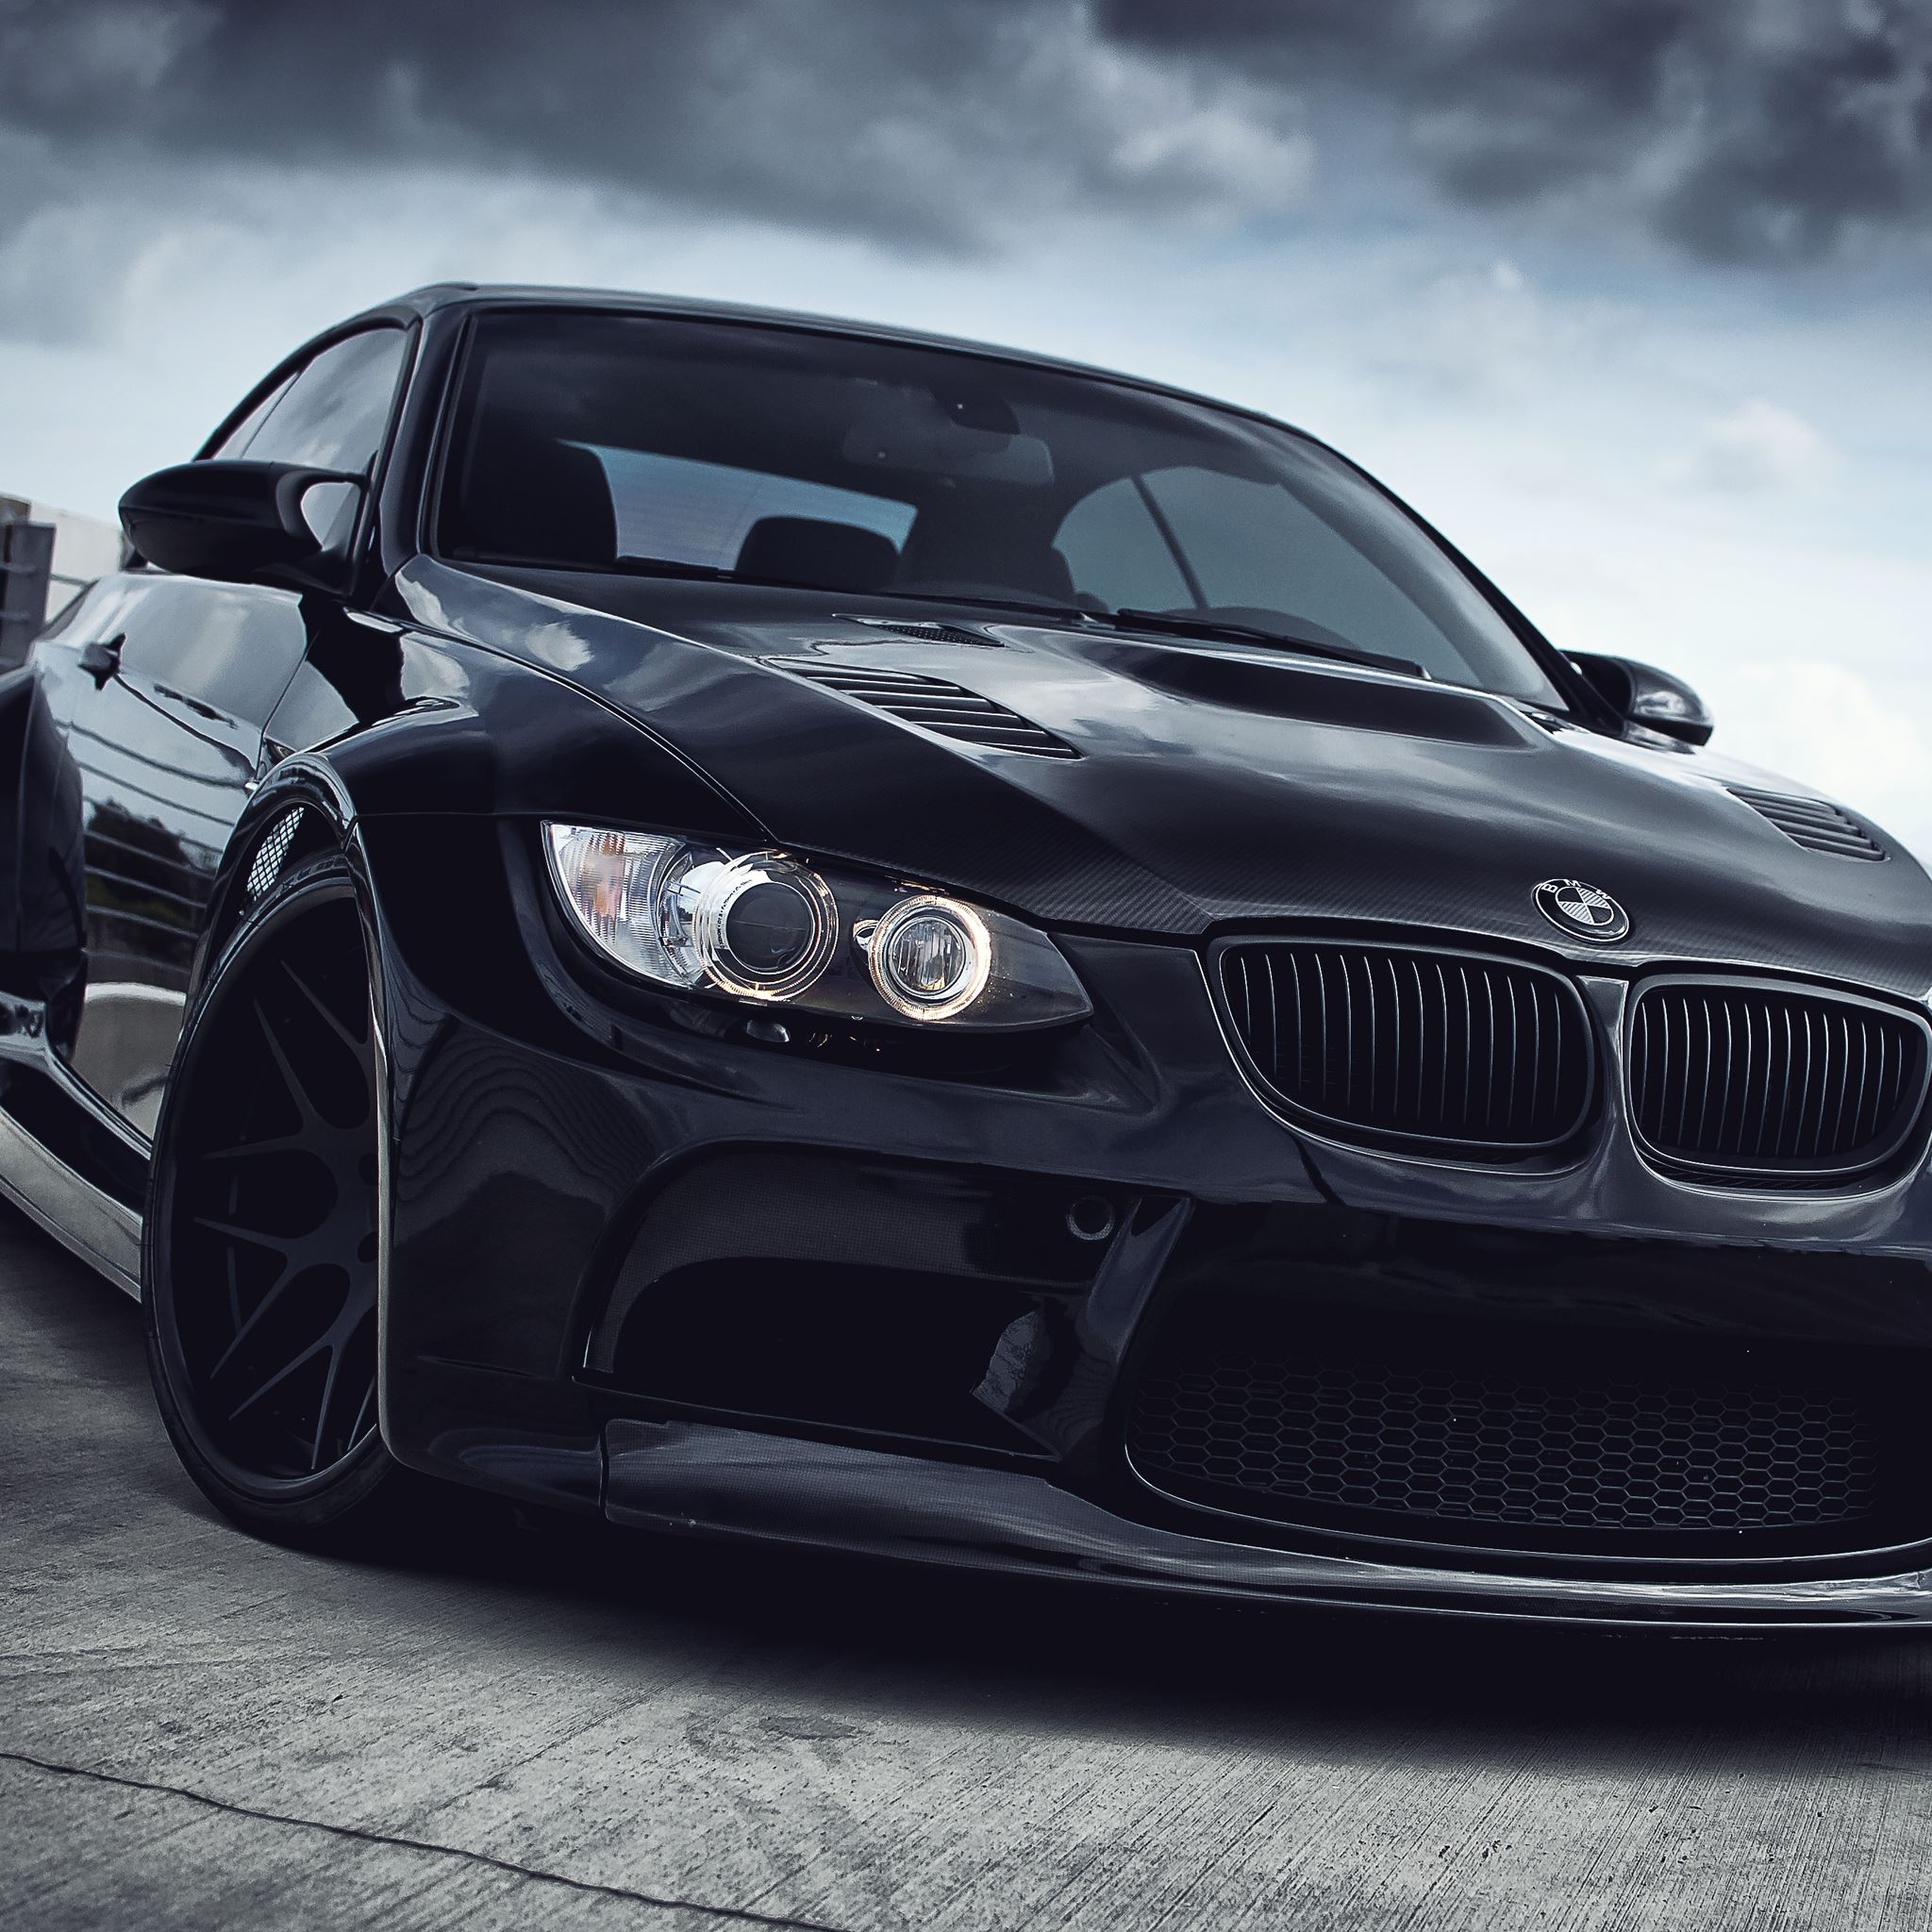 Bmw wallpaper for ipad #2